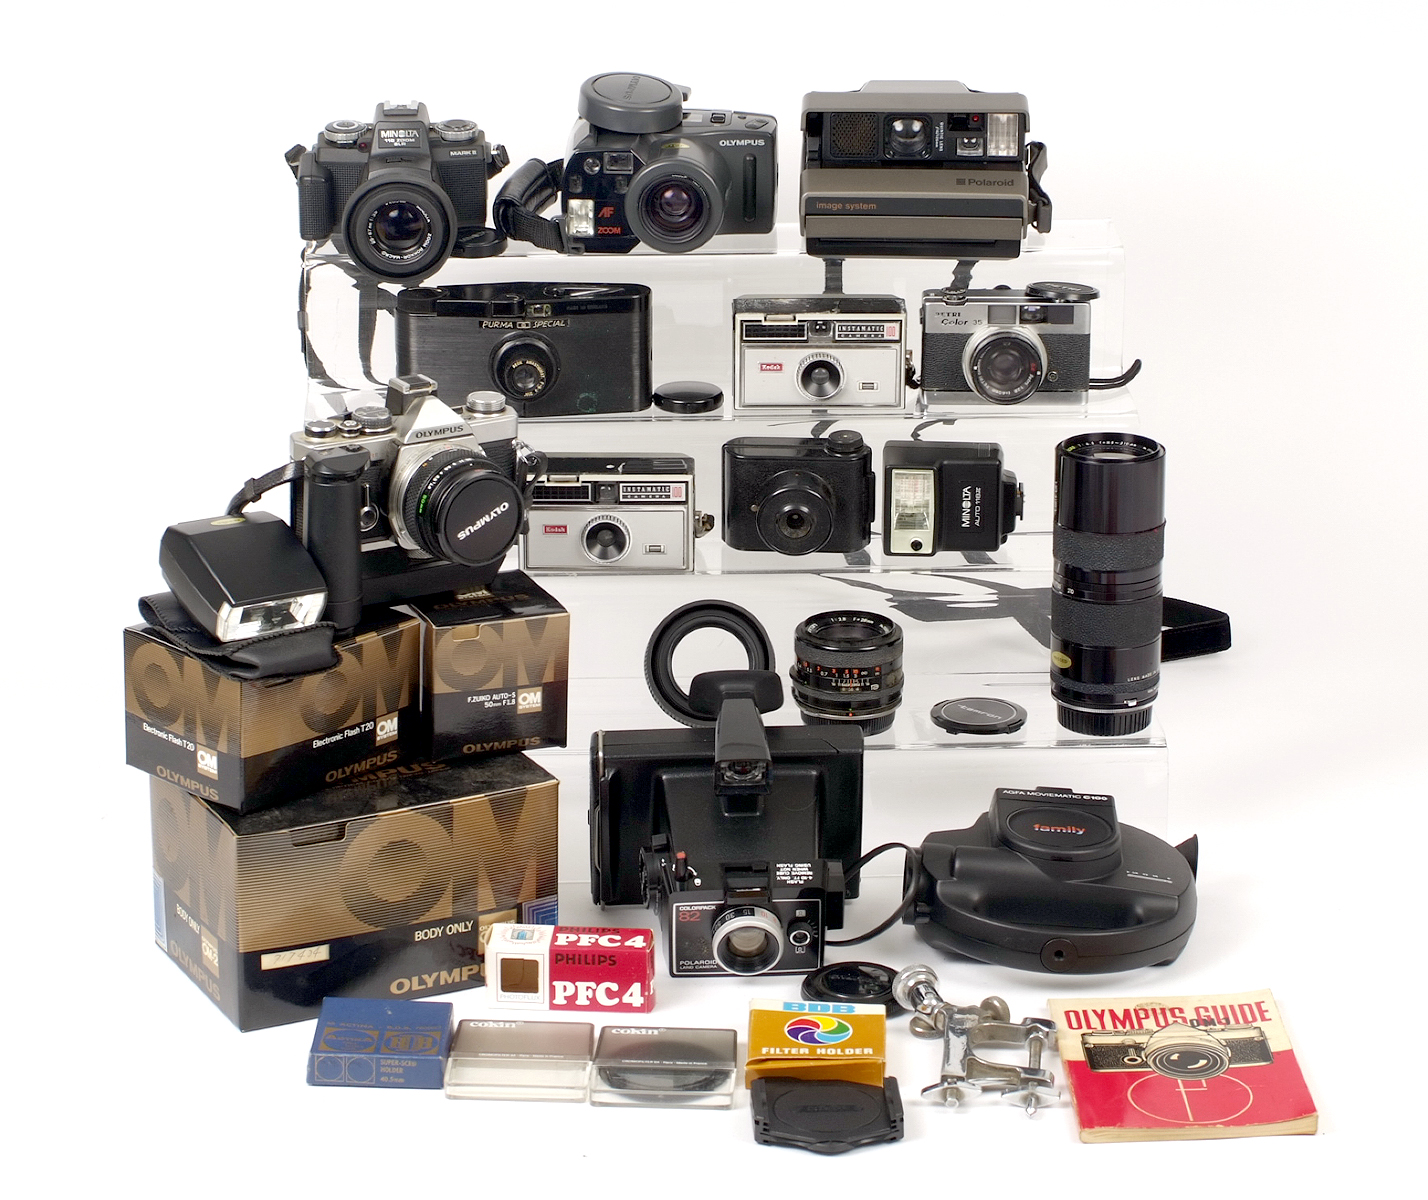 Boxed Olympus OM2n Outfit, Plus Other Vintage Cameras. To include Olympus OM2n body (condition